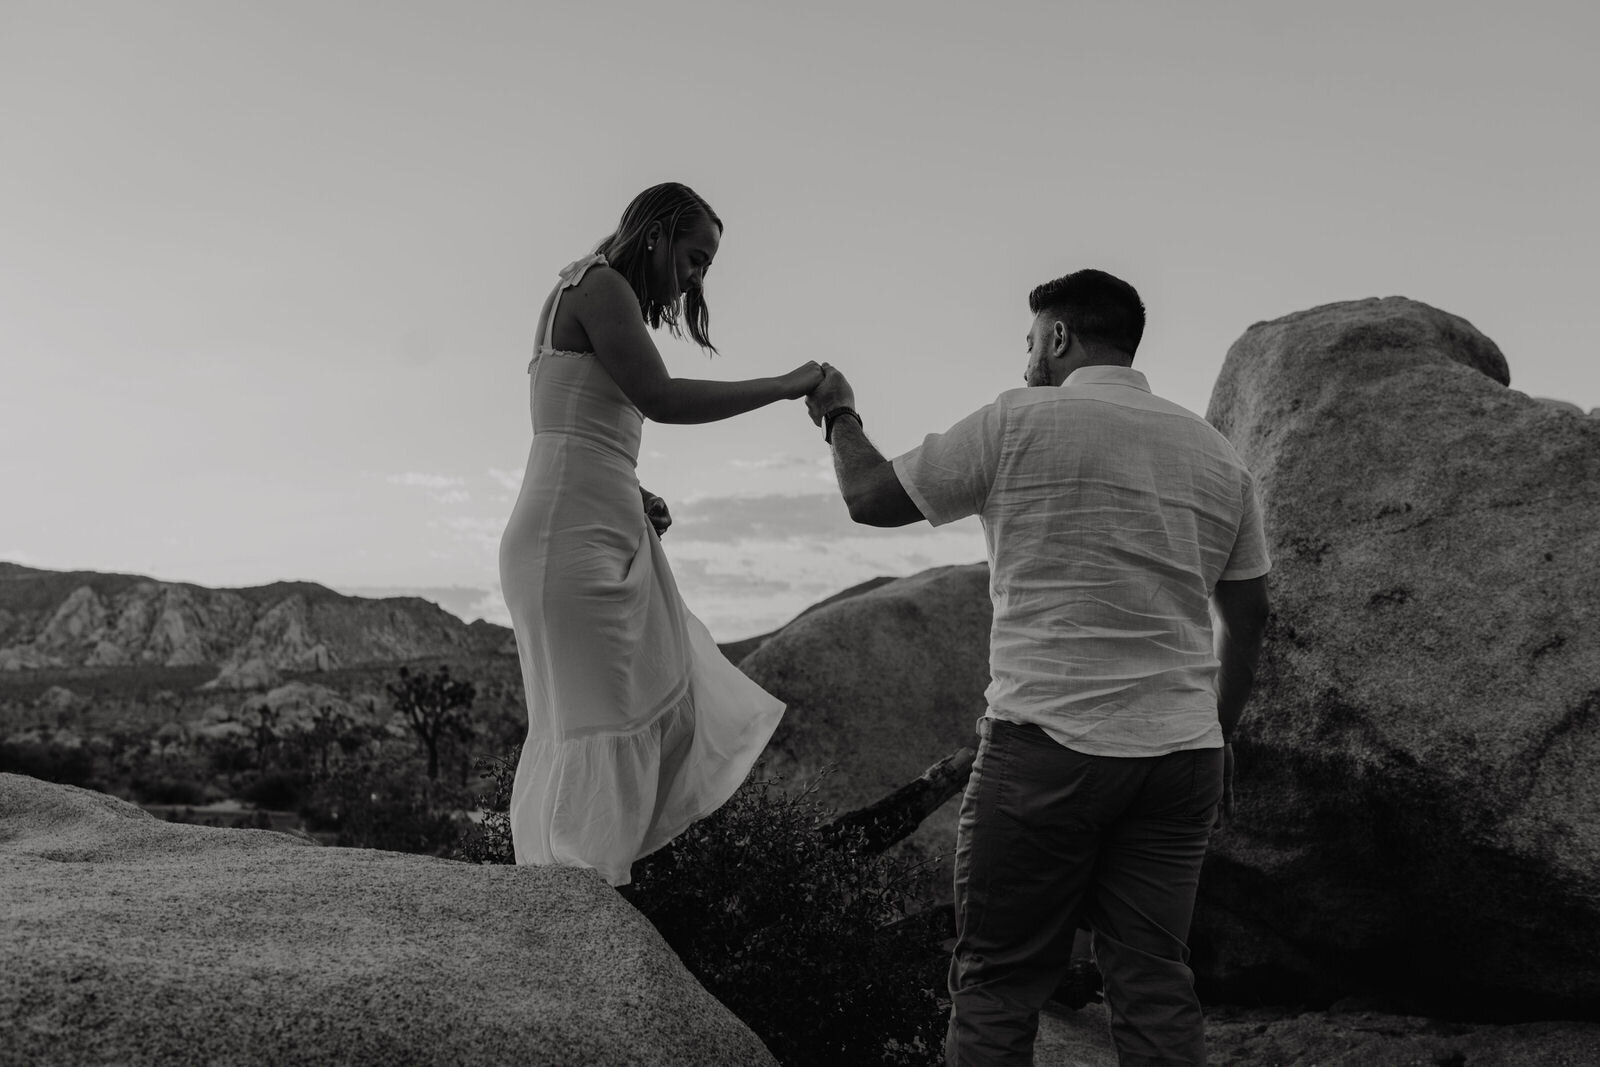 Black and white photo of man helping woman climb off boulder - Sunrise Engagement Session in Joshua Tree, Ca - Photos by Adventurous Elopement + Wedding Photographer Kept Record | www.keptrecord.com